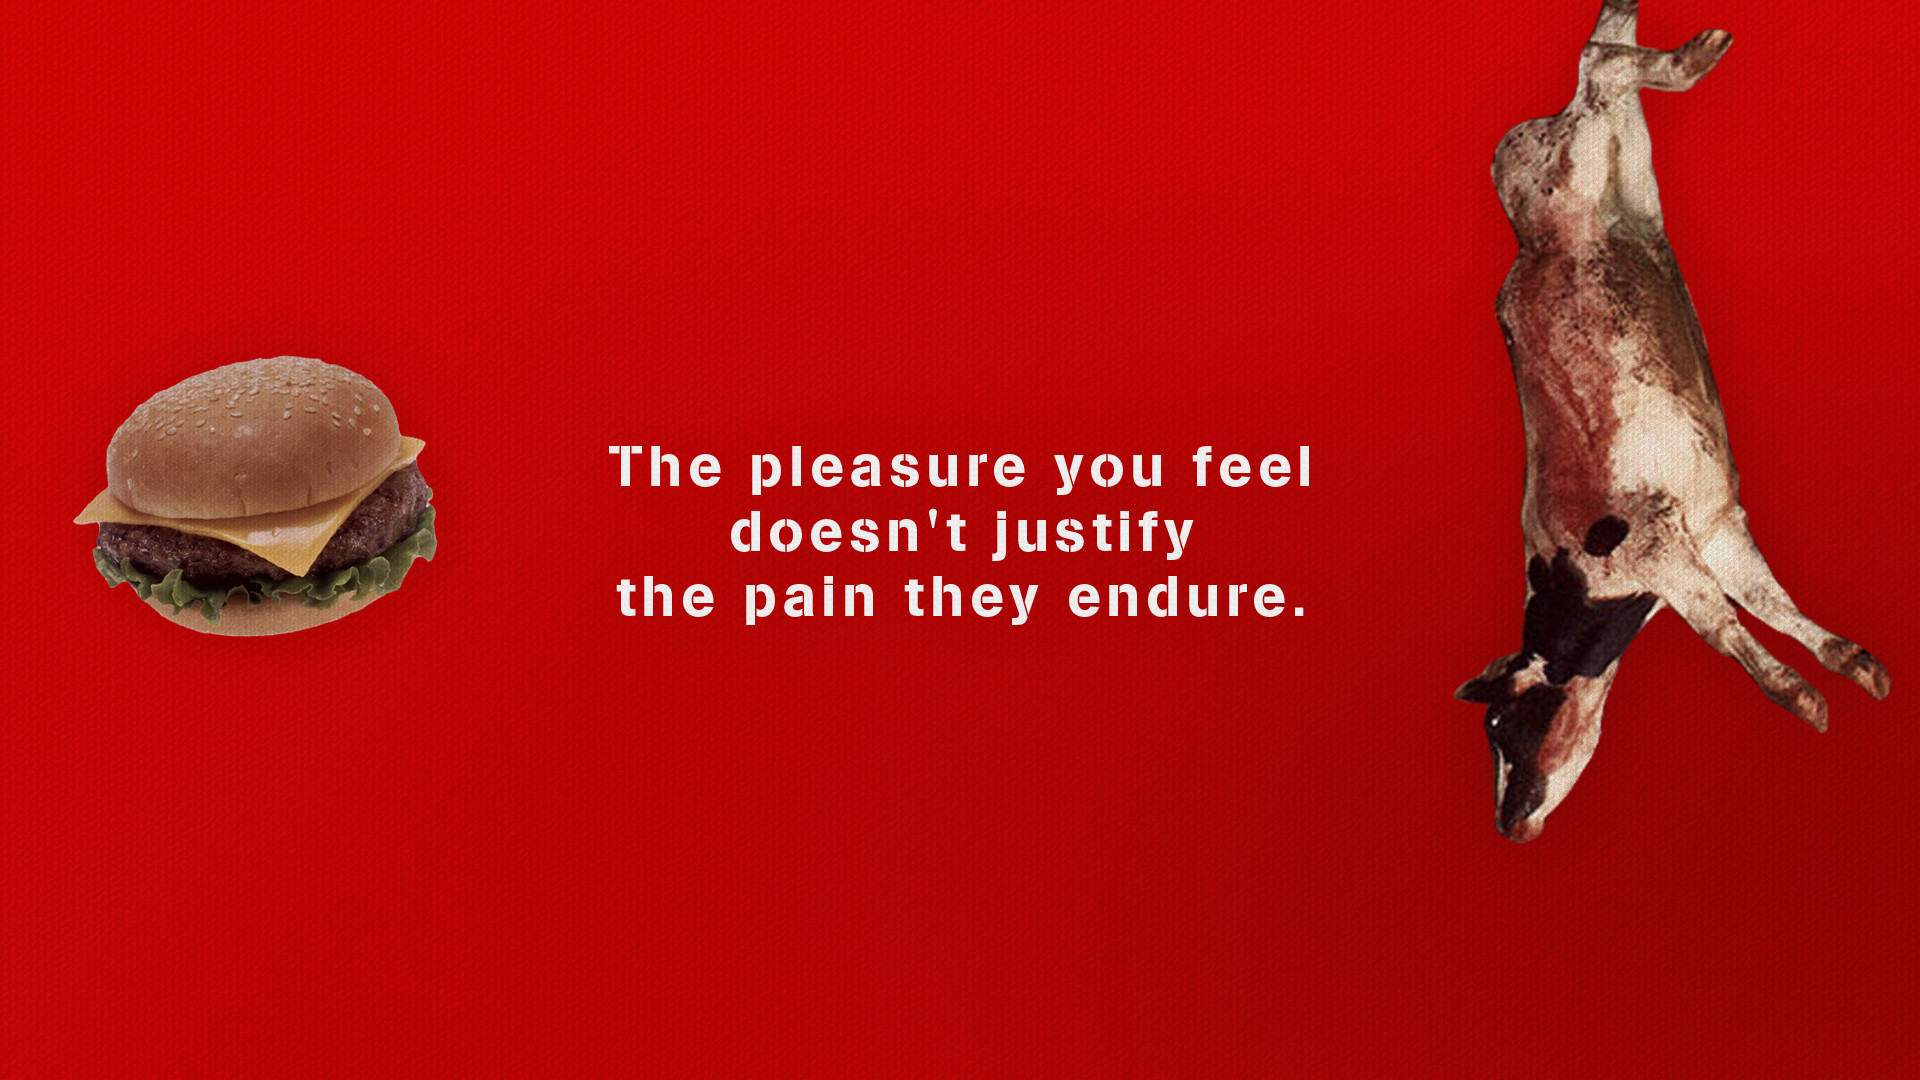 1920x1080 The pleasure you feel doesn't justify the pain they endure